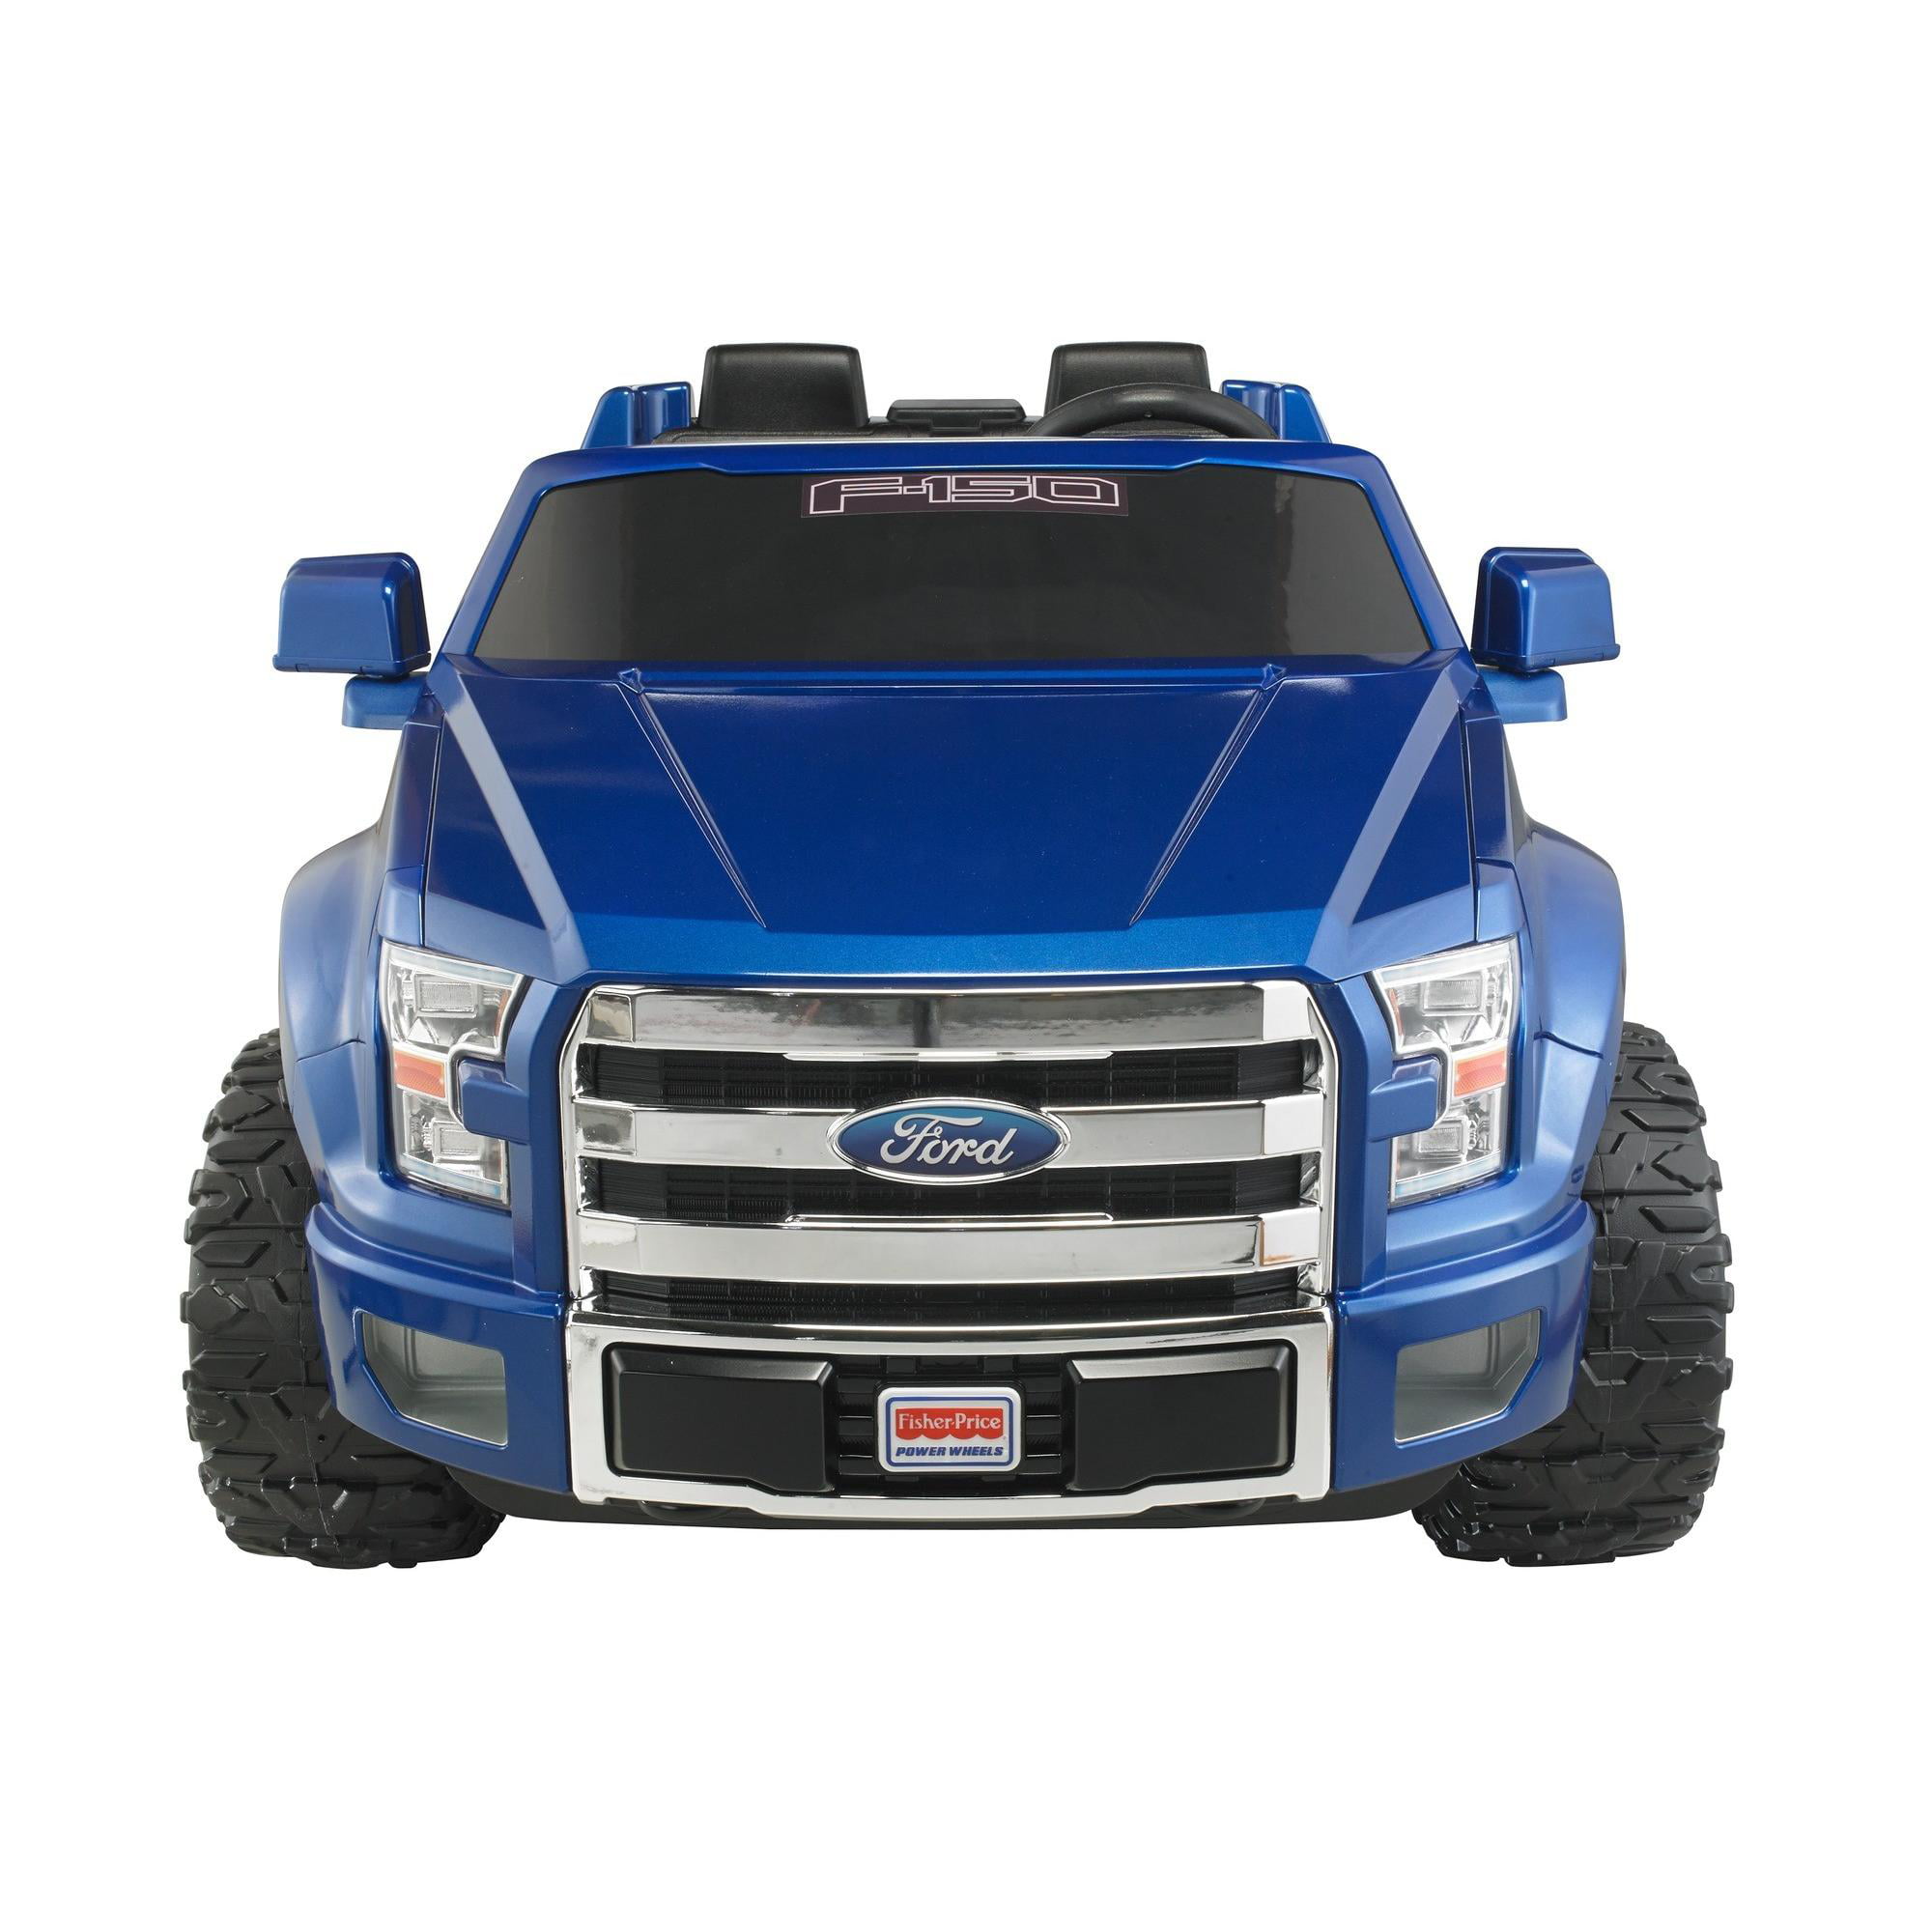 f150 battery powered toy truck